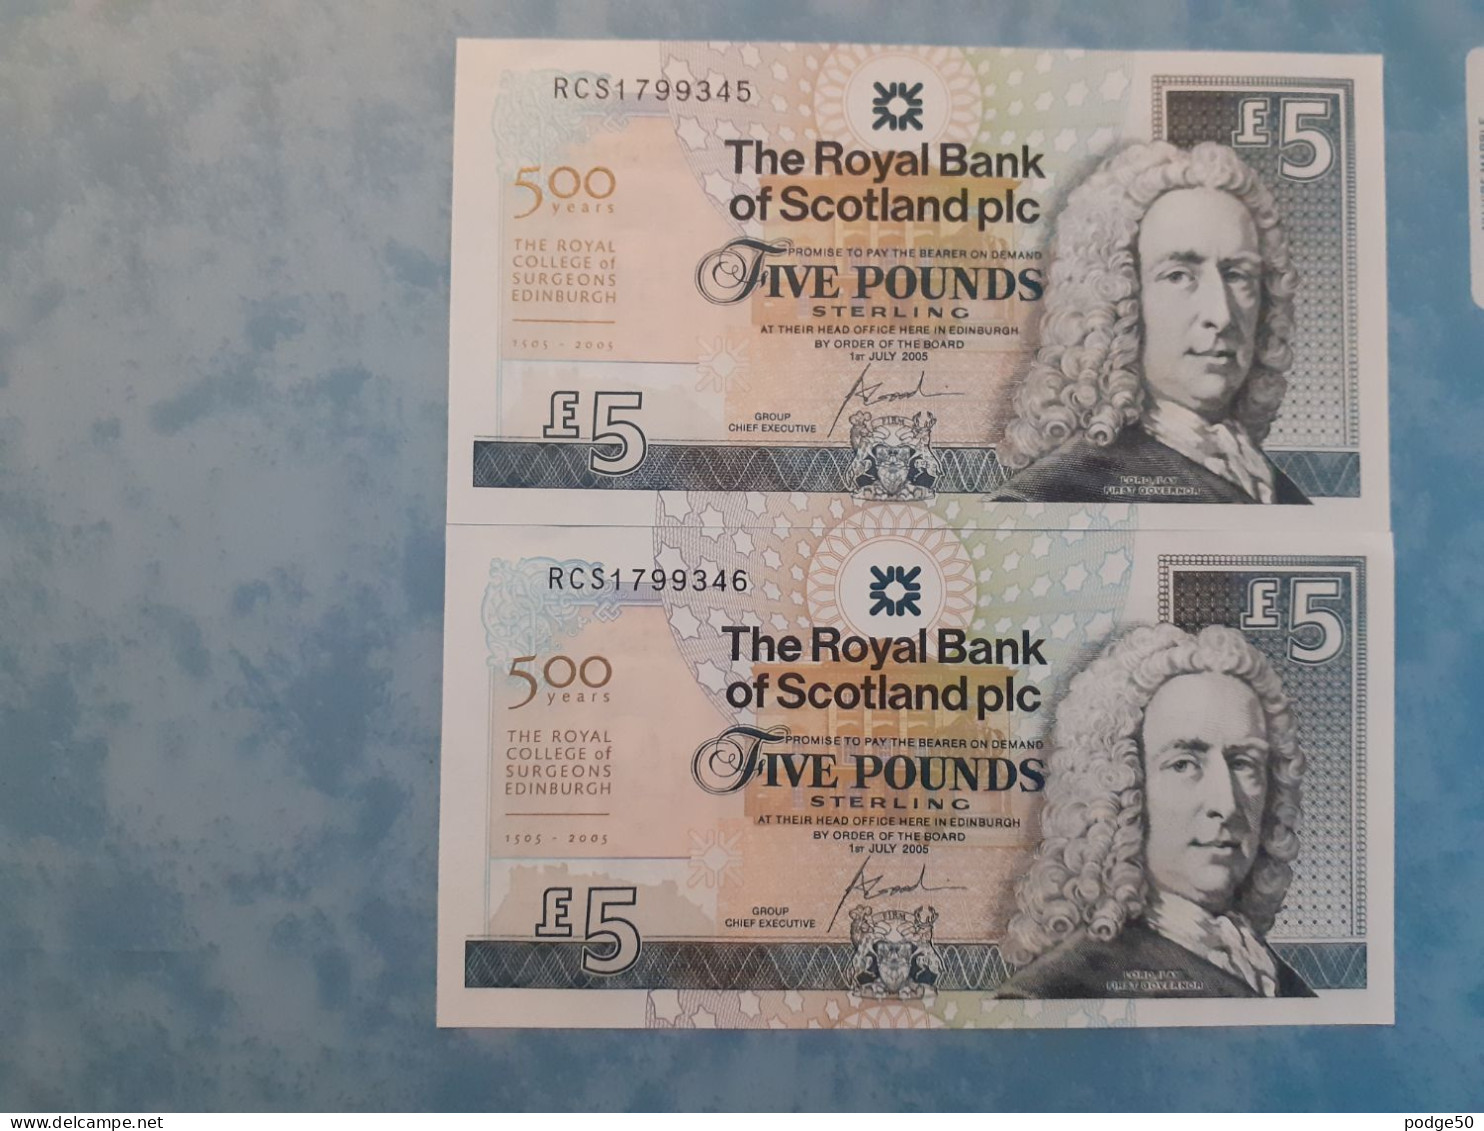 ROYAL BANK OF SCOTLAND 2005 UNCIRCULATED CONSECUTIVE ROYAL COLLEGE OF SURGEONS £5 NOTES - 5 Pounds